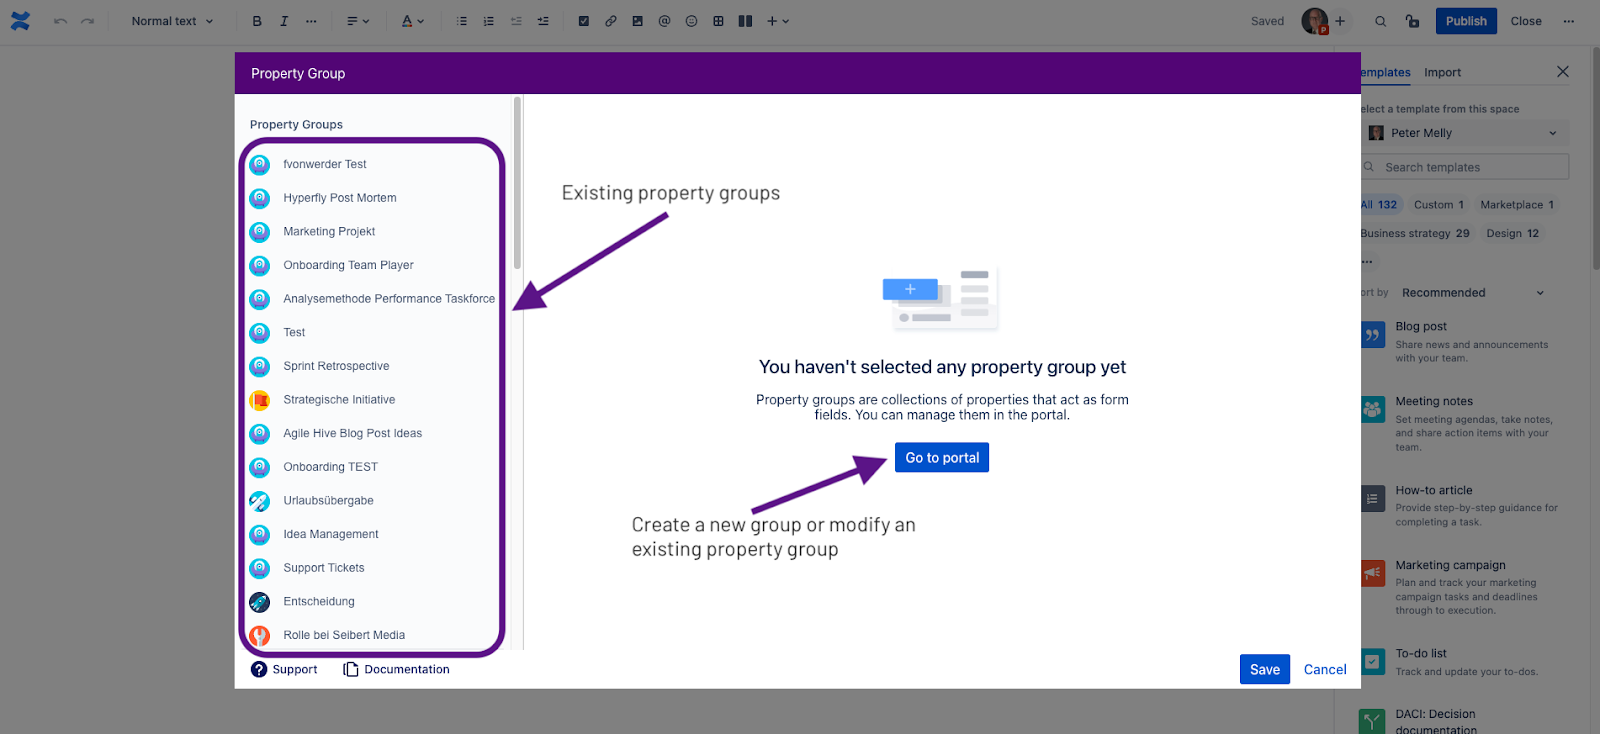 existing-property-groups-and-button-to-create-new